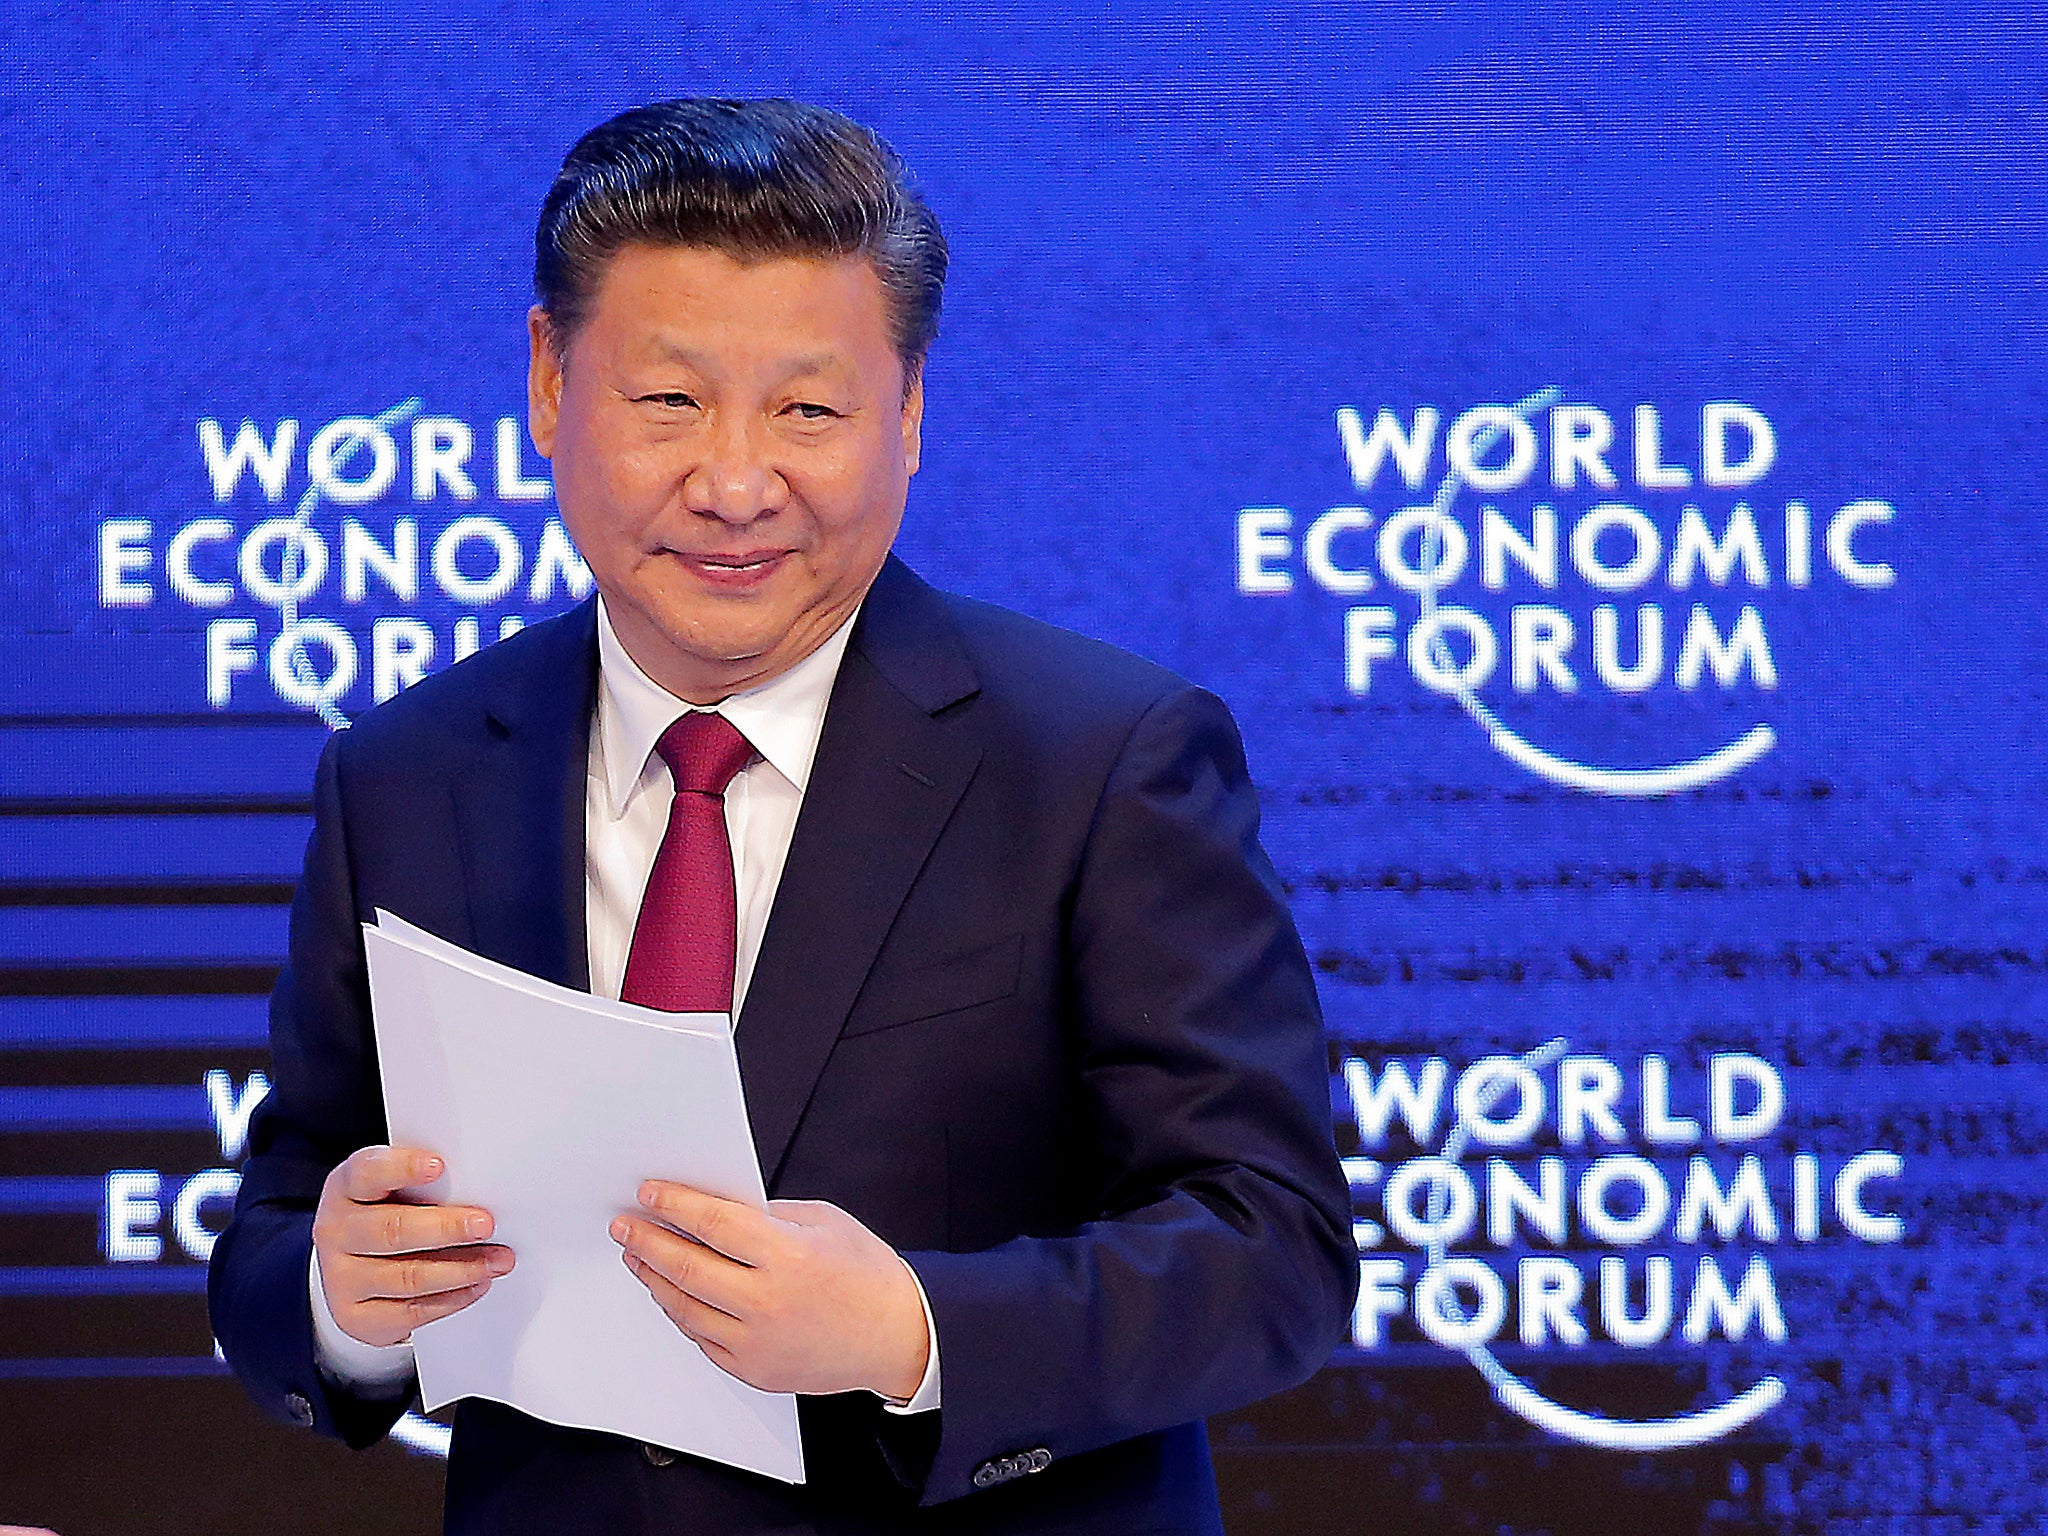 China's President Xi Jinping used his speech at the World Economic Forum to spurn protectionism